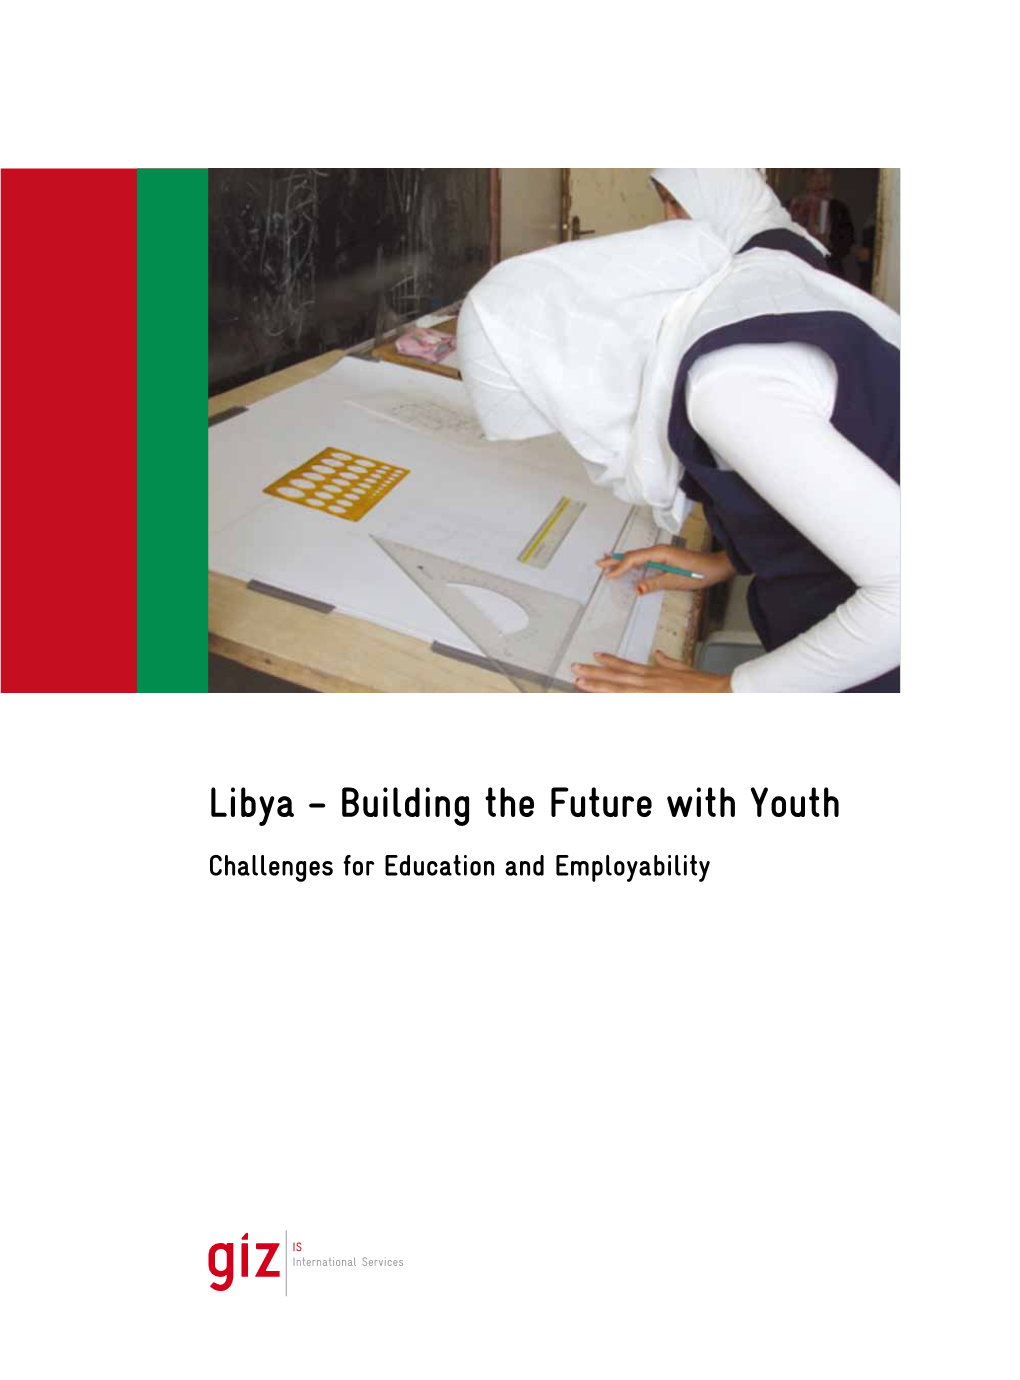 Libya – Building the Future with Youth Challenges for Education and Employability